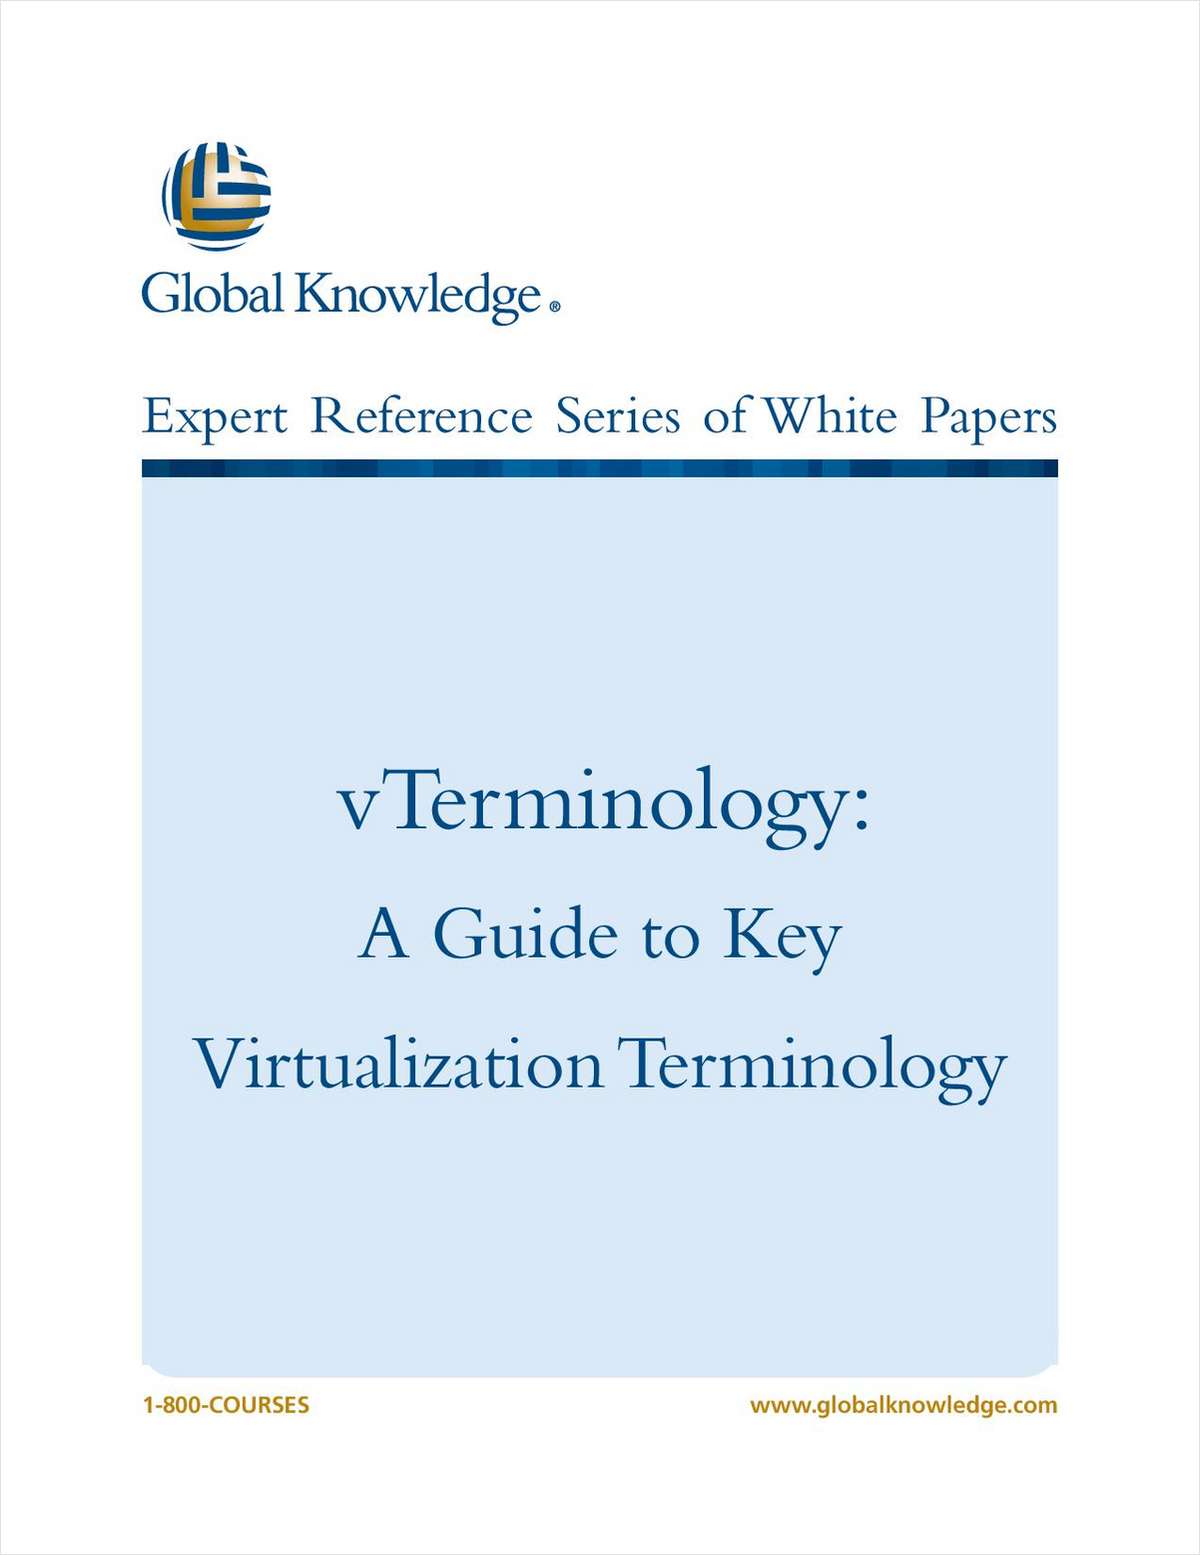 vTerminolgy: A Guide to Key Virtualization Terminology